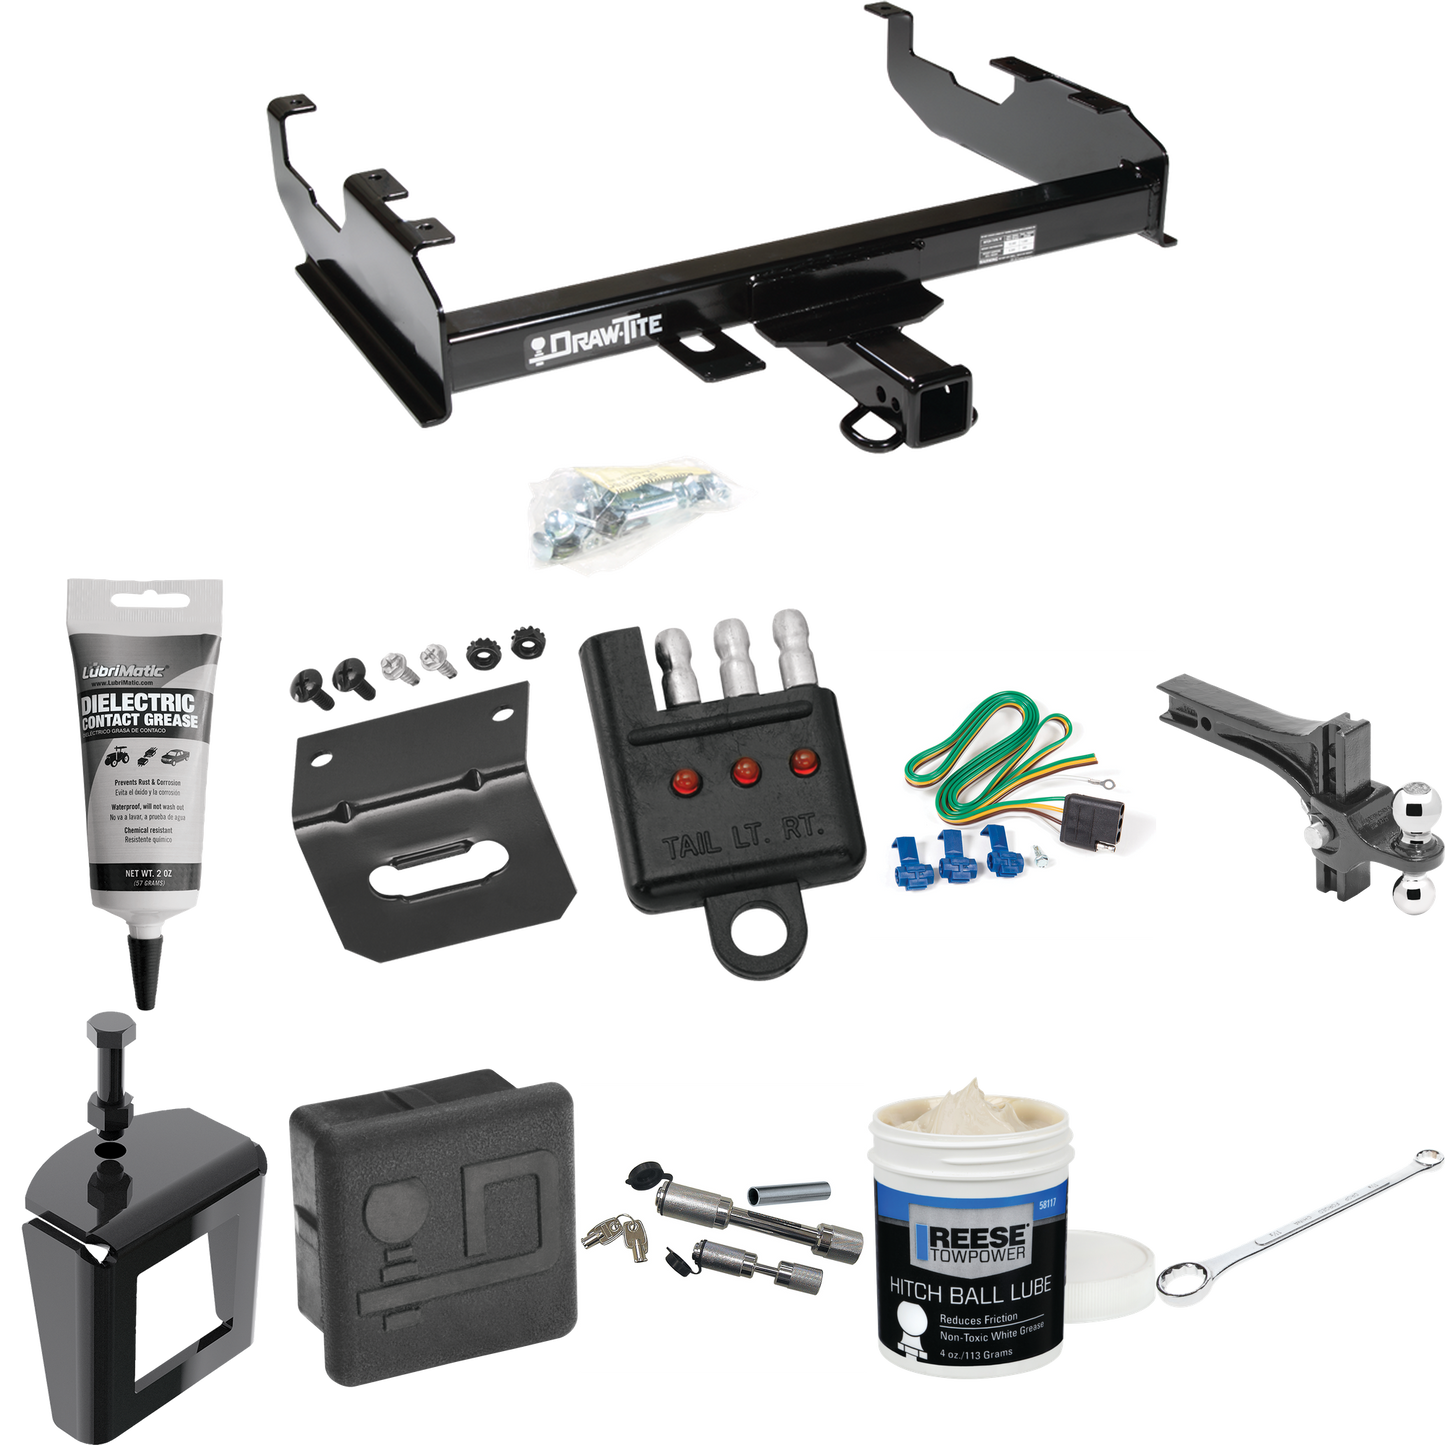 Fits 1967-1974 GMC K15 Trailer Hitch Tow PKG w/ 4-Flat Wiring + Dual Adjustable Drop Rise Ball Ball Mount 2" & 2-5/16" Trailer Balls + Wiring Bracket + Hitch Cover + Dual Hitch & Coupler Locks + Wiring Tester + Ball Lube + Electric Grease + Ball Wren